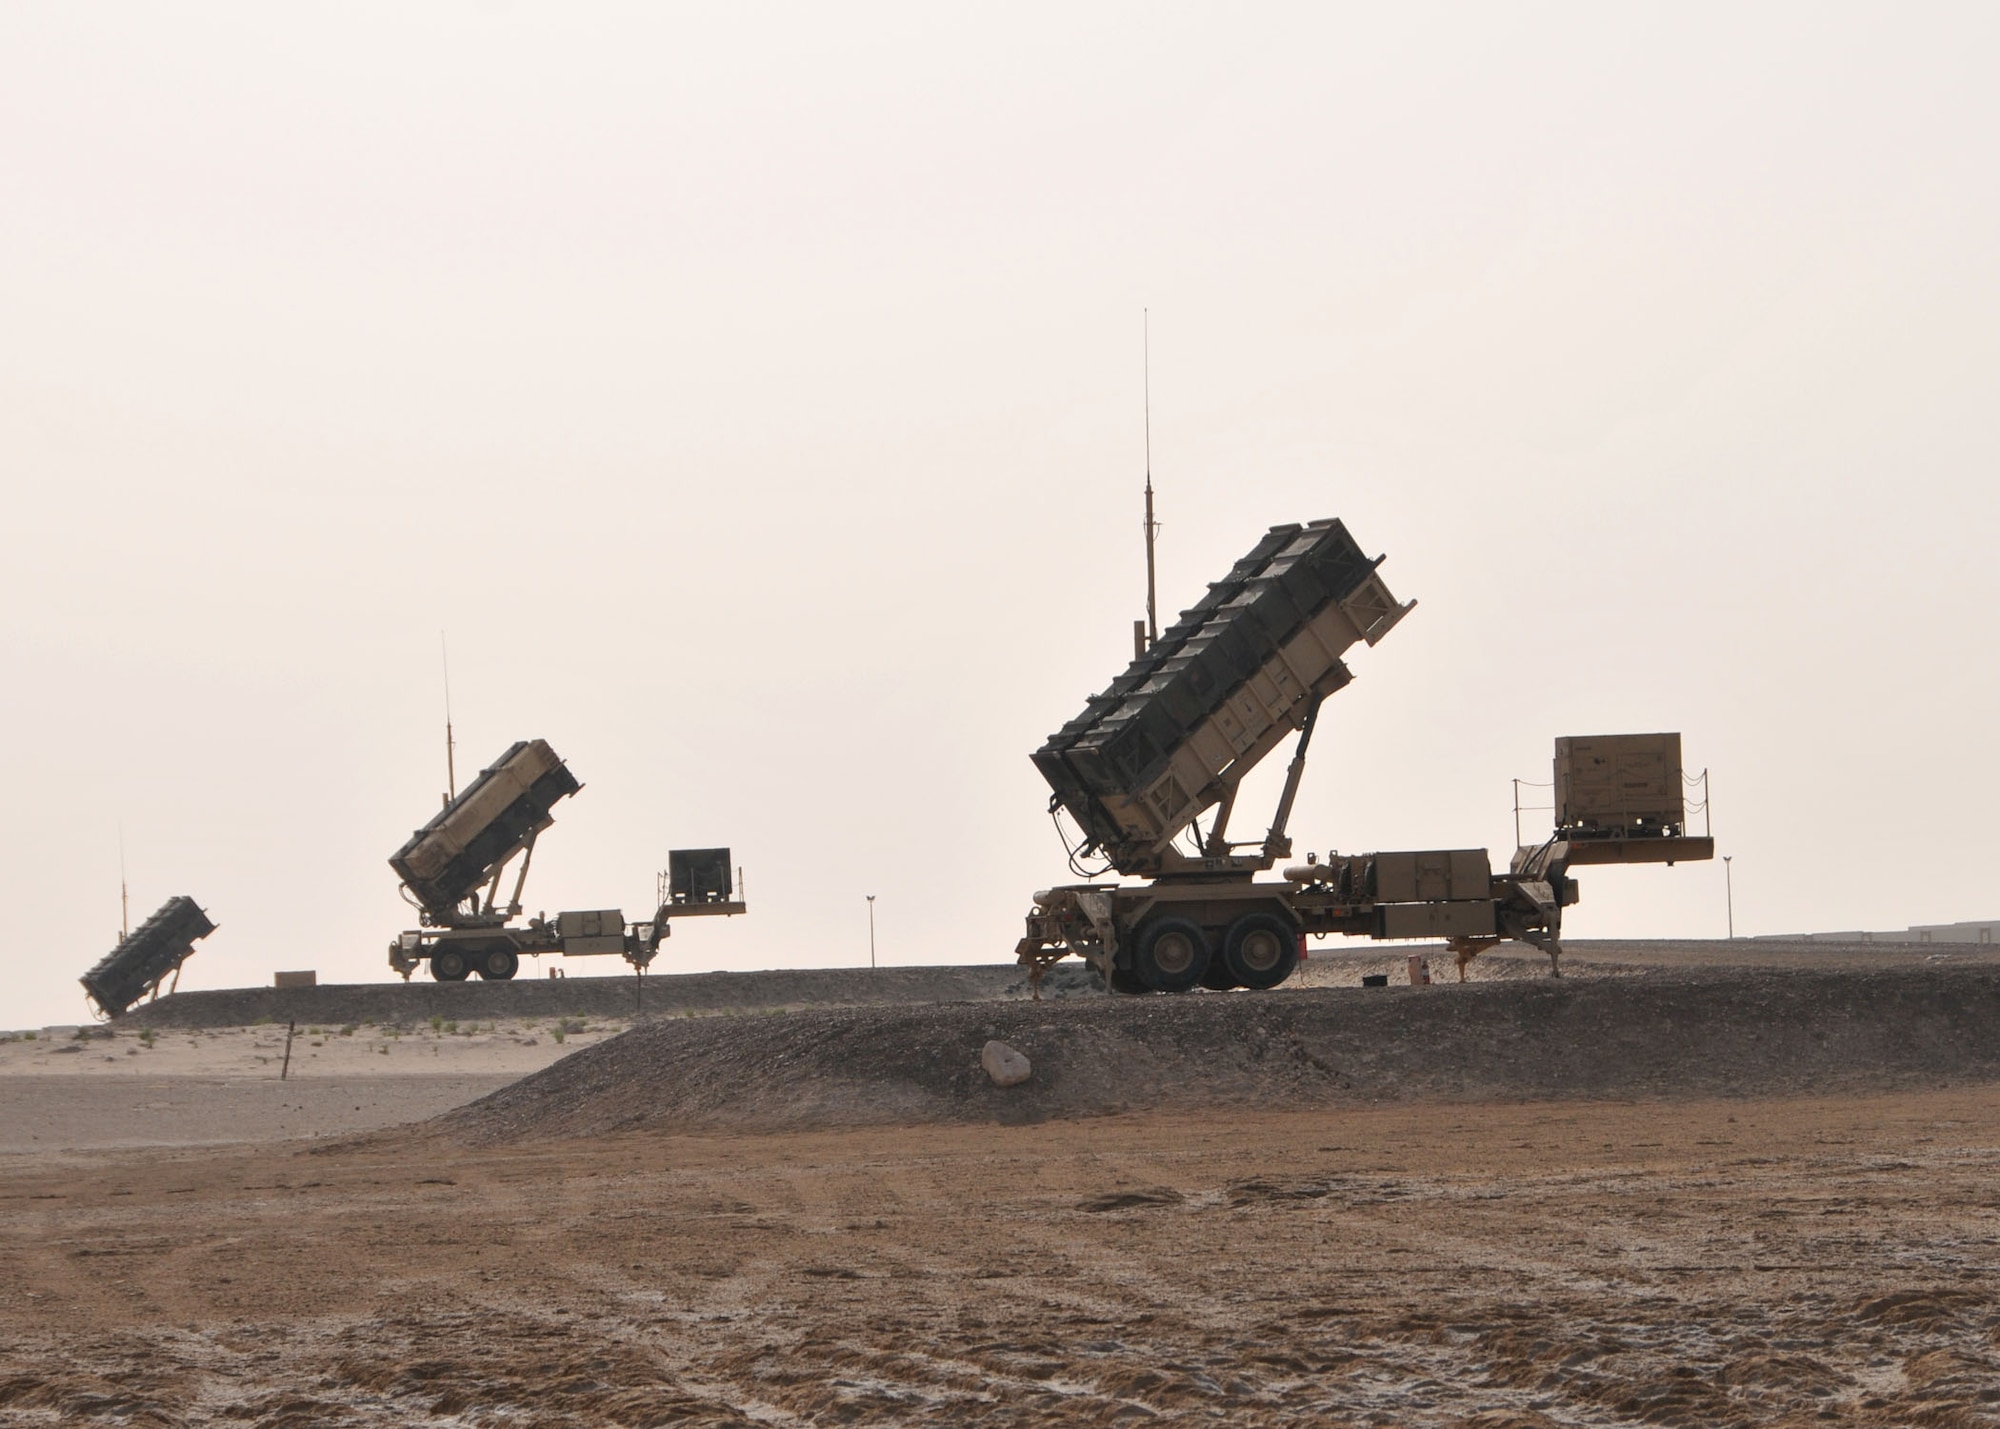 A set of three Army Patriot missile launchers assigned to Charlie Battery, 3rd Battalion, 4th Air Defense Artillery Regiment stand ready to defend the 380th Air Expeditionary Wing against airborne threats to at an undisclosed location in Southwest Asia on April 24, 2014. (U.S. Air Force photo by Senior Master Sgt. Eric Peterson/Released)

